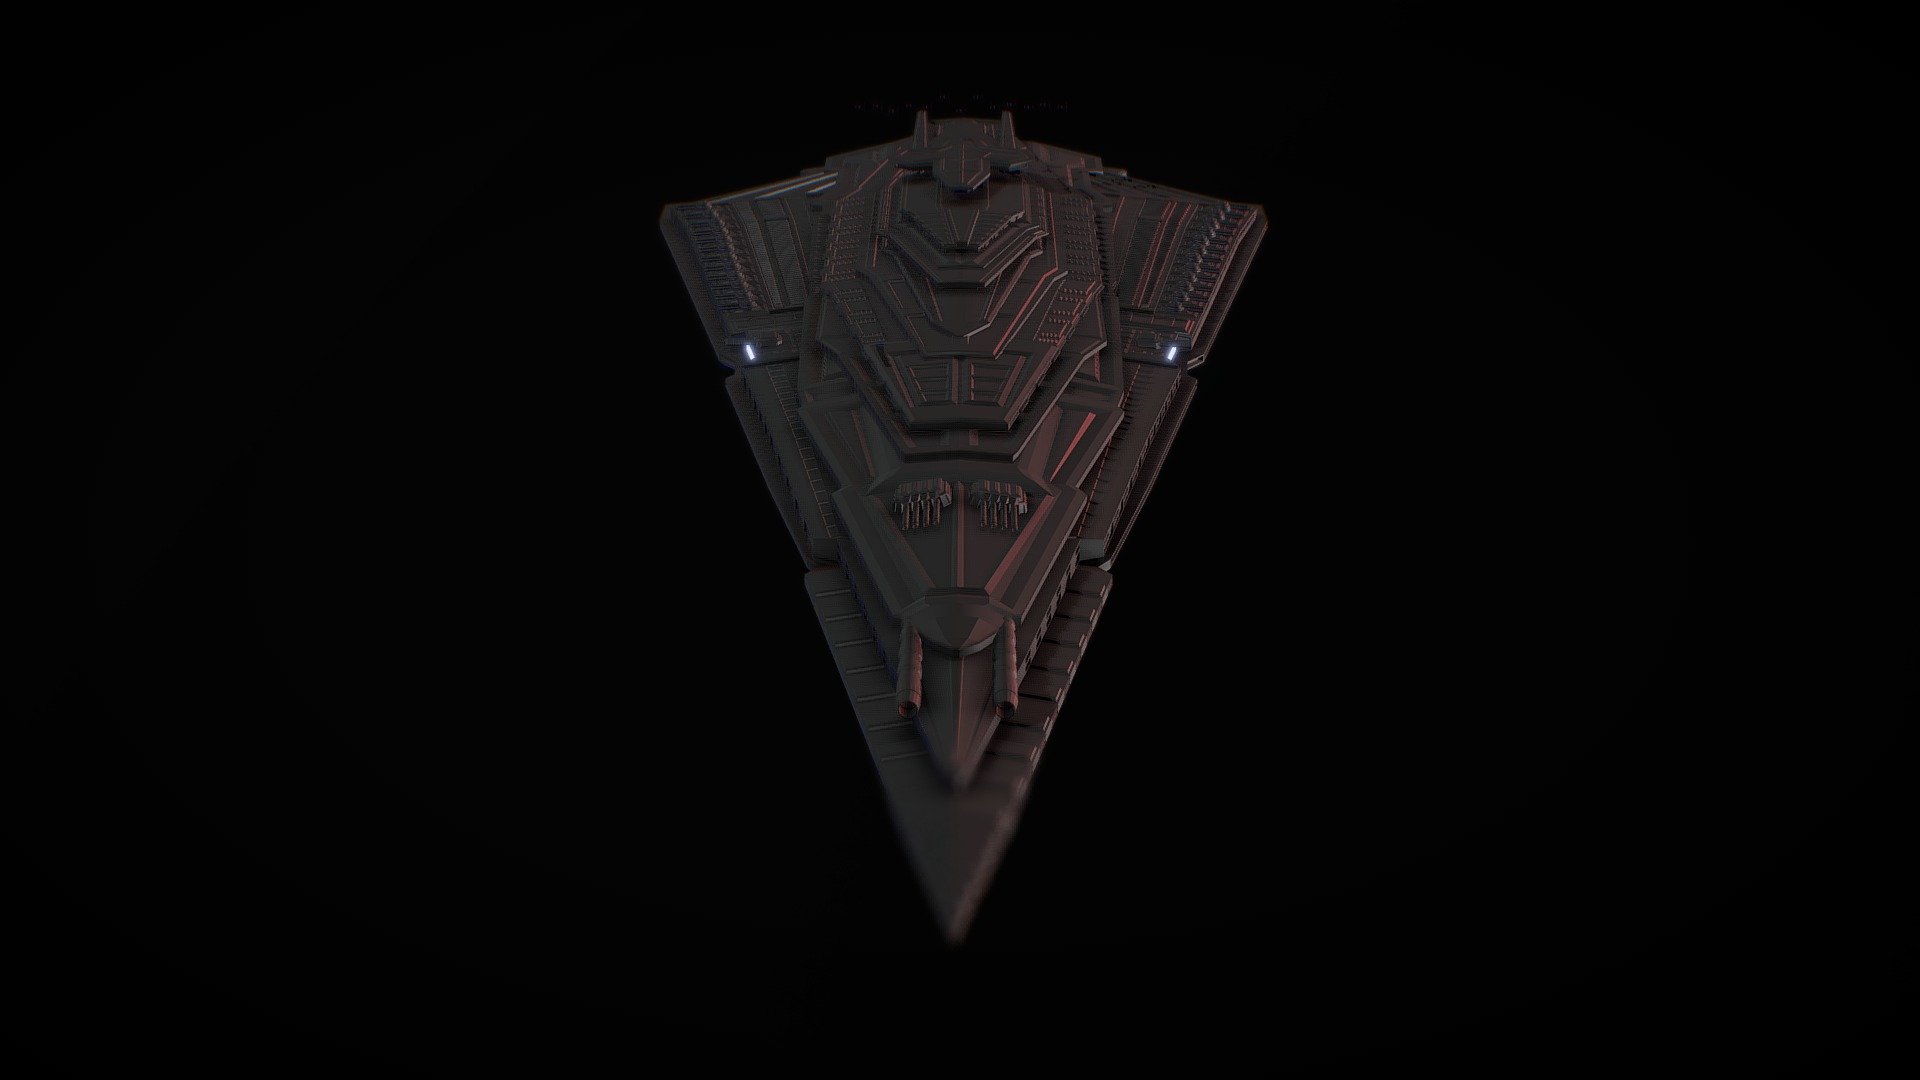 3D model Star Wars Star Destroyer - This is a 3D model of the Star Wars Star Destroyer. The 3D model is about a metal object with a design on it.